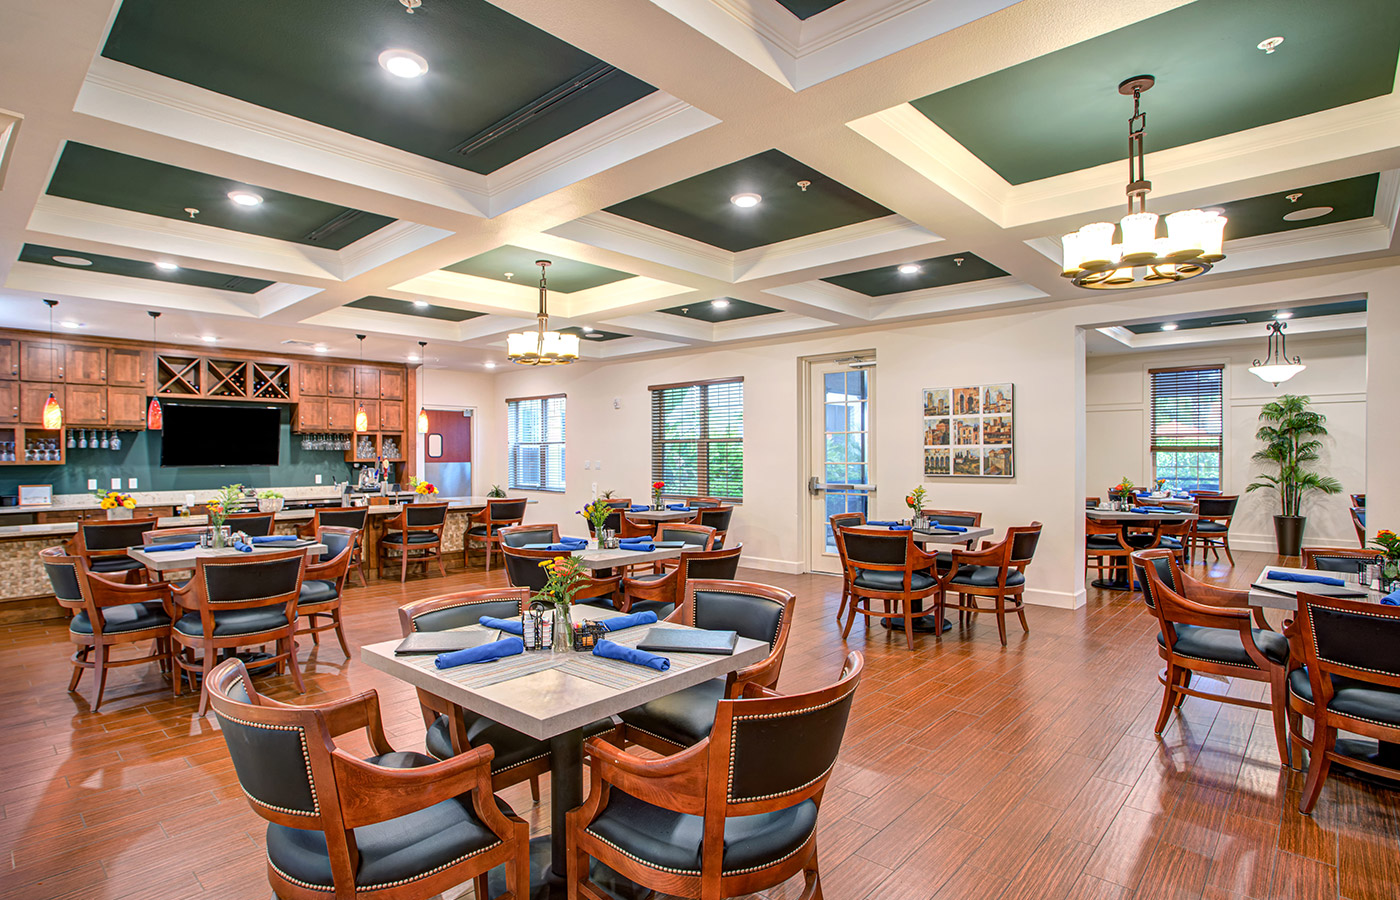 A dining area at The Glades at ChampionsGate.
